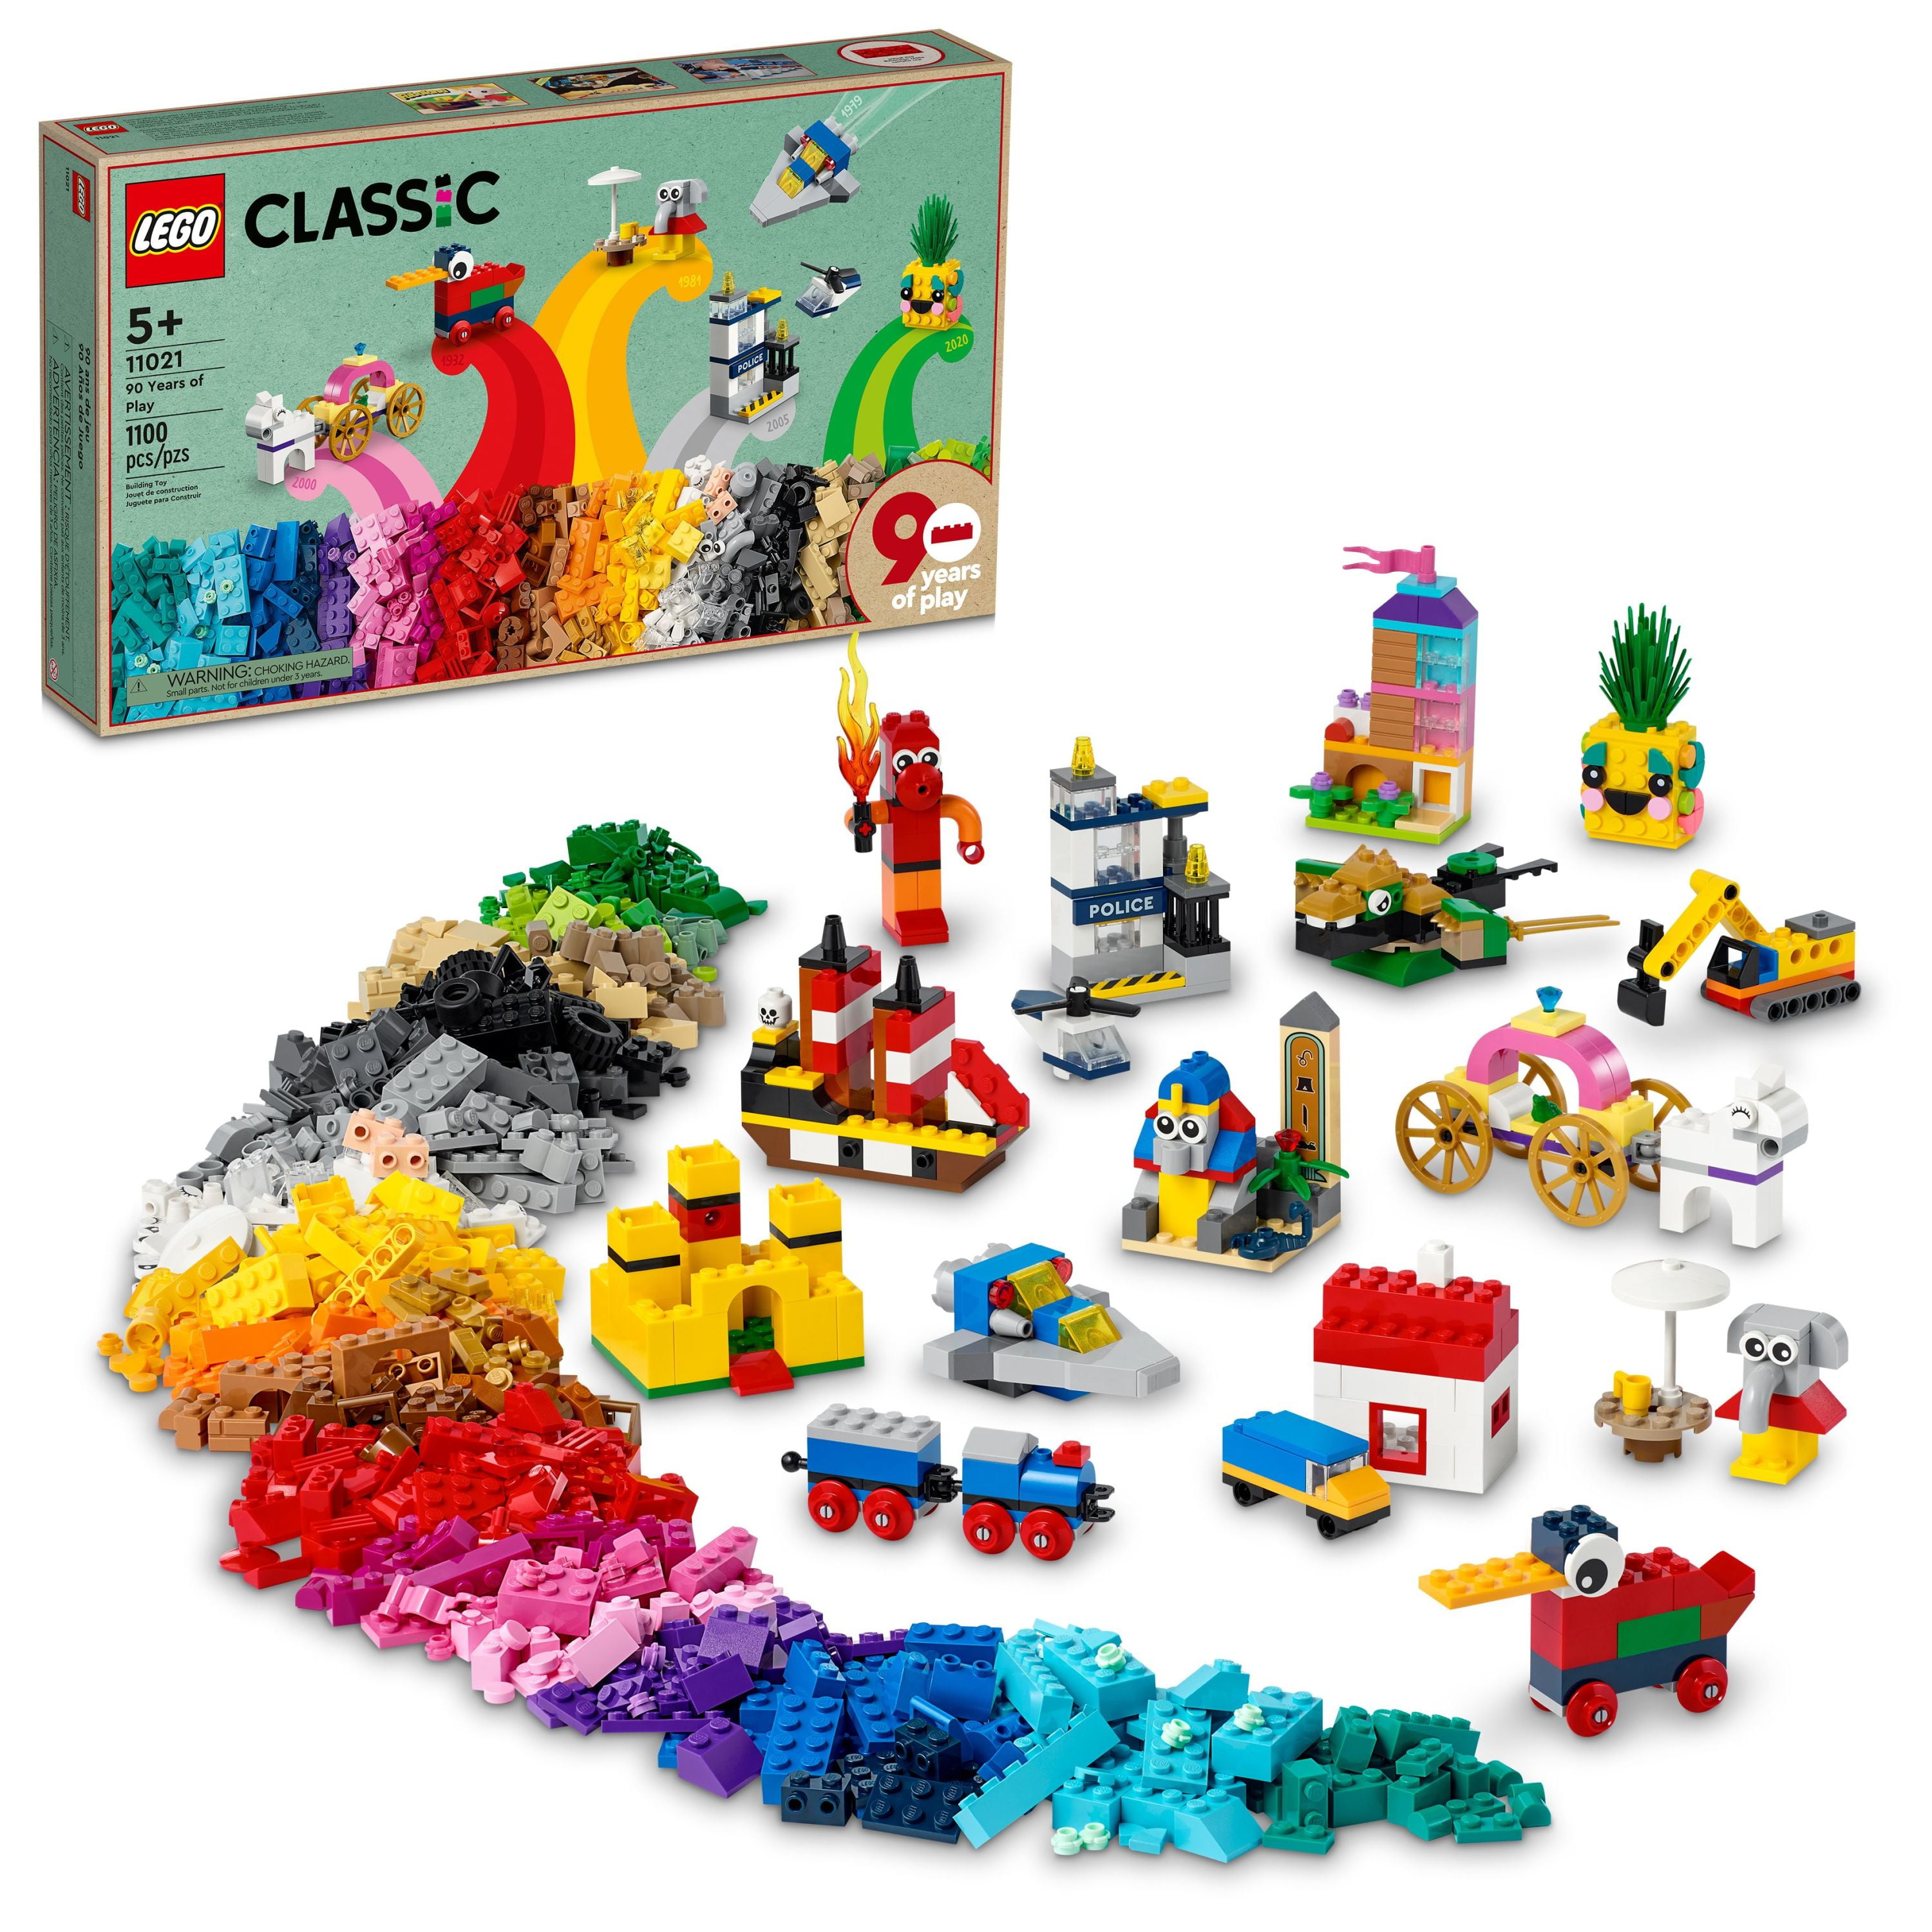 Classic 90 Years of Play Building Set with 15 Builds 11021 - Walmart.com